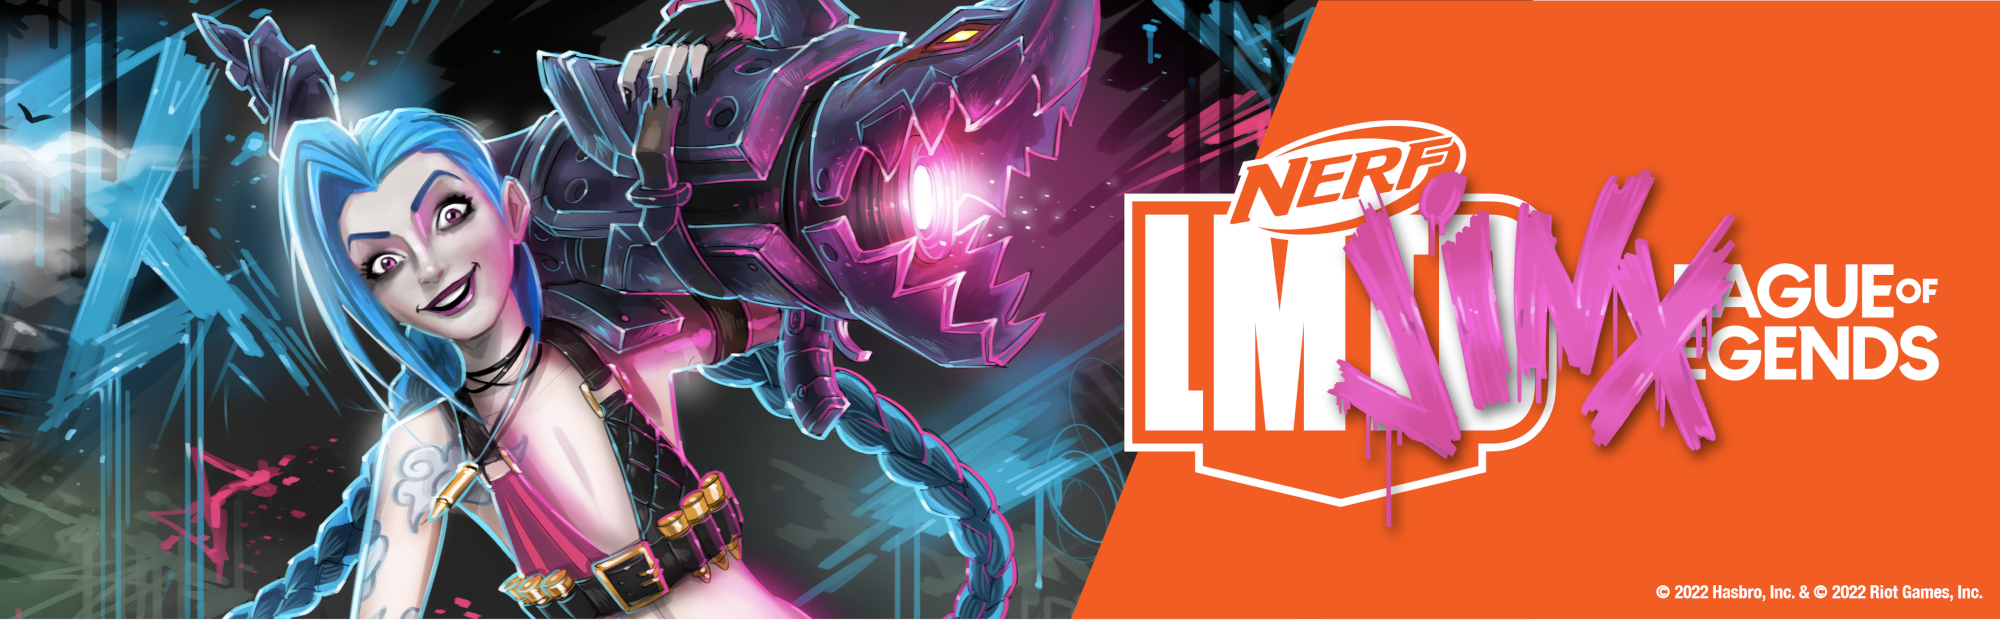 Nerf banner. Text on the image reads Nerf LMTD. League of Legends. The name Jinx is painted on top of the Nerf logo.